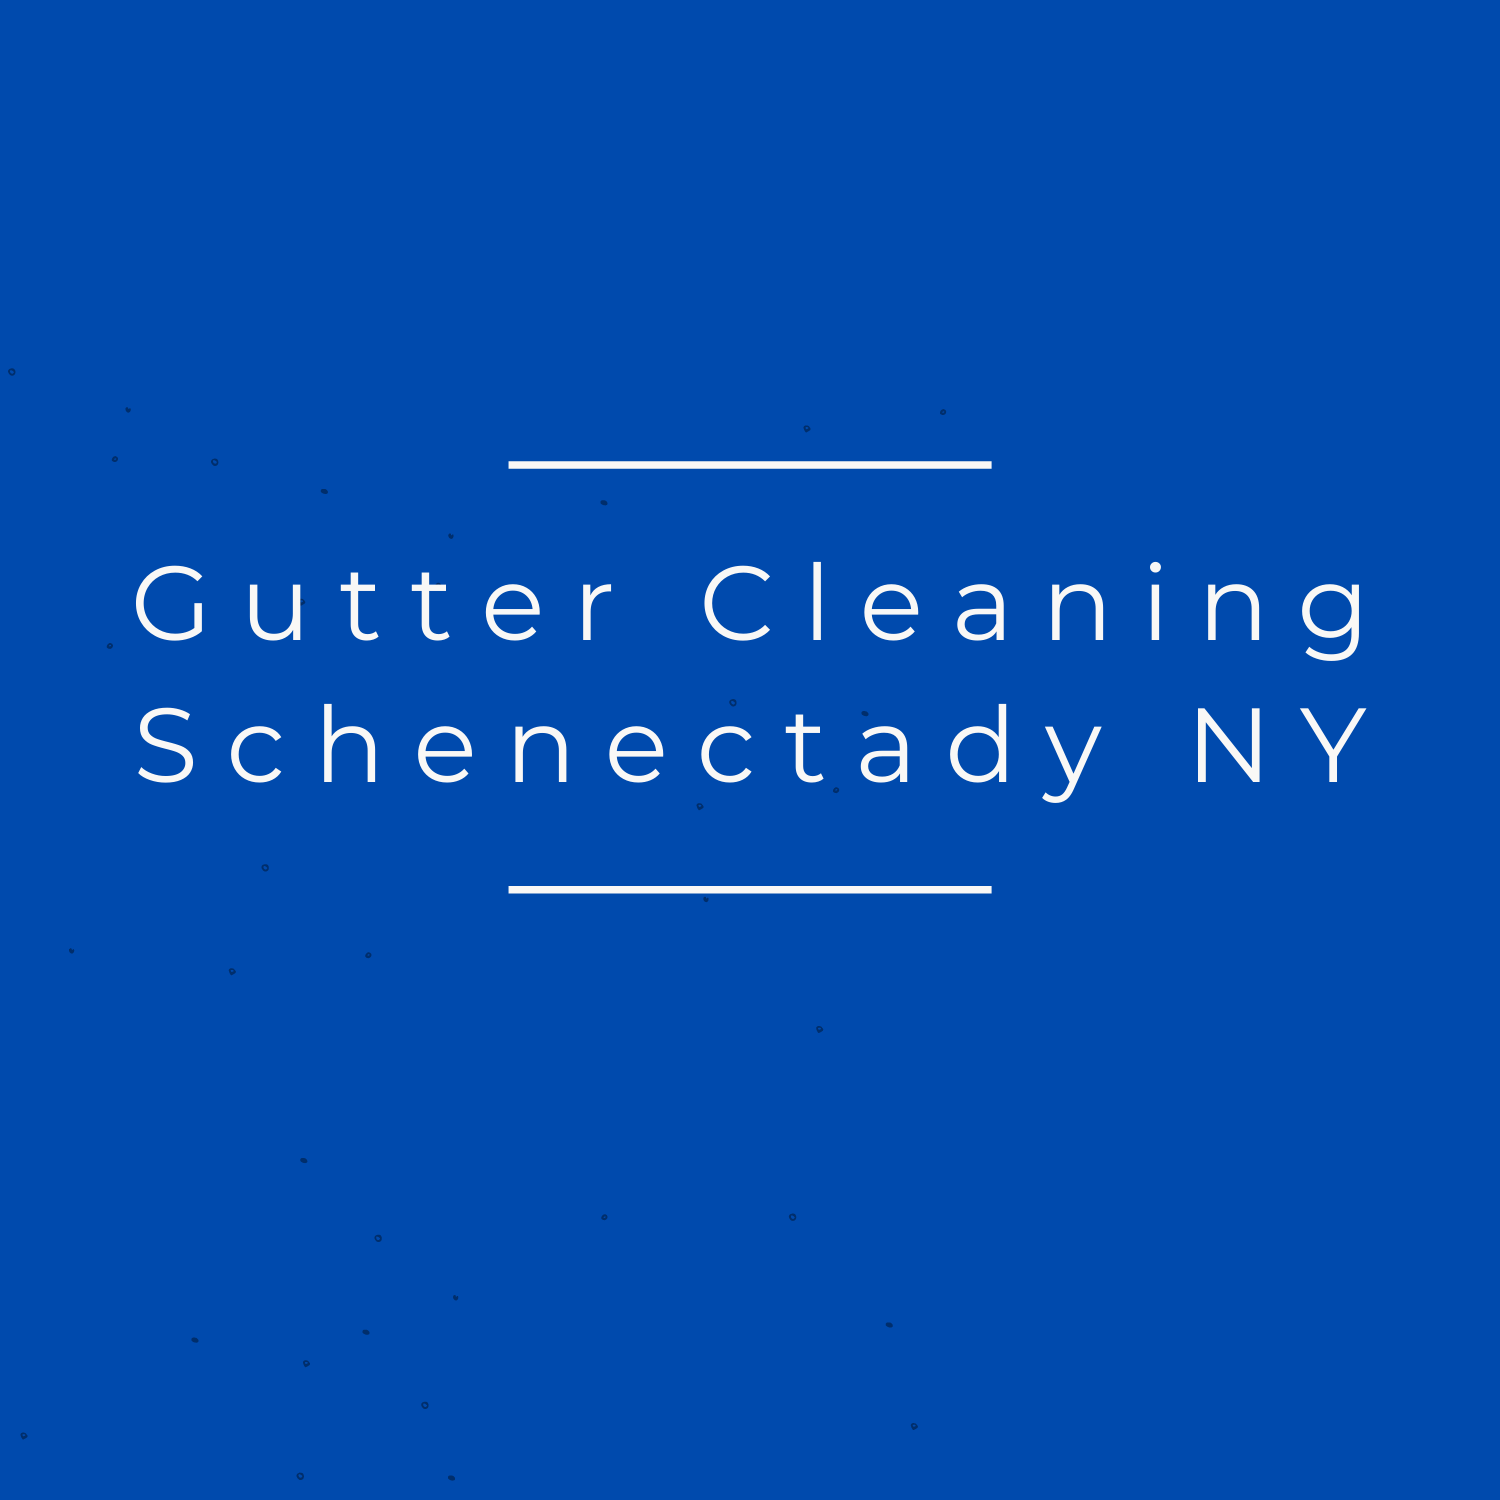 Gutter Cleaning Schenectady NY's Logo